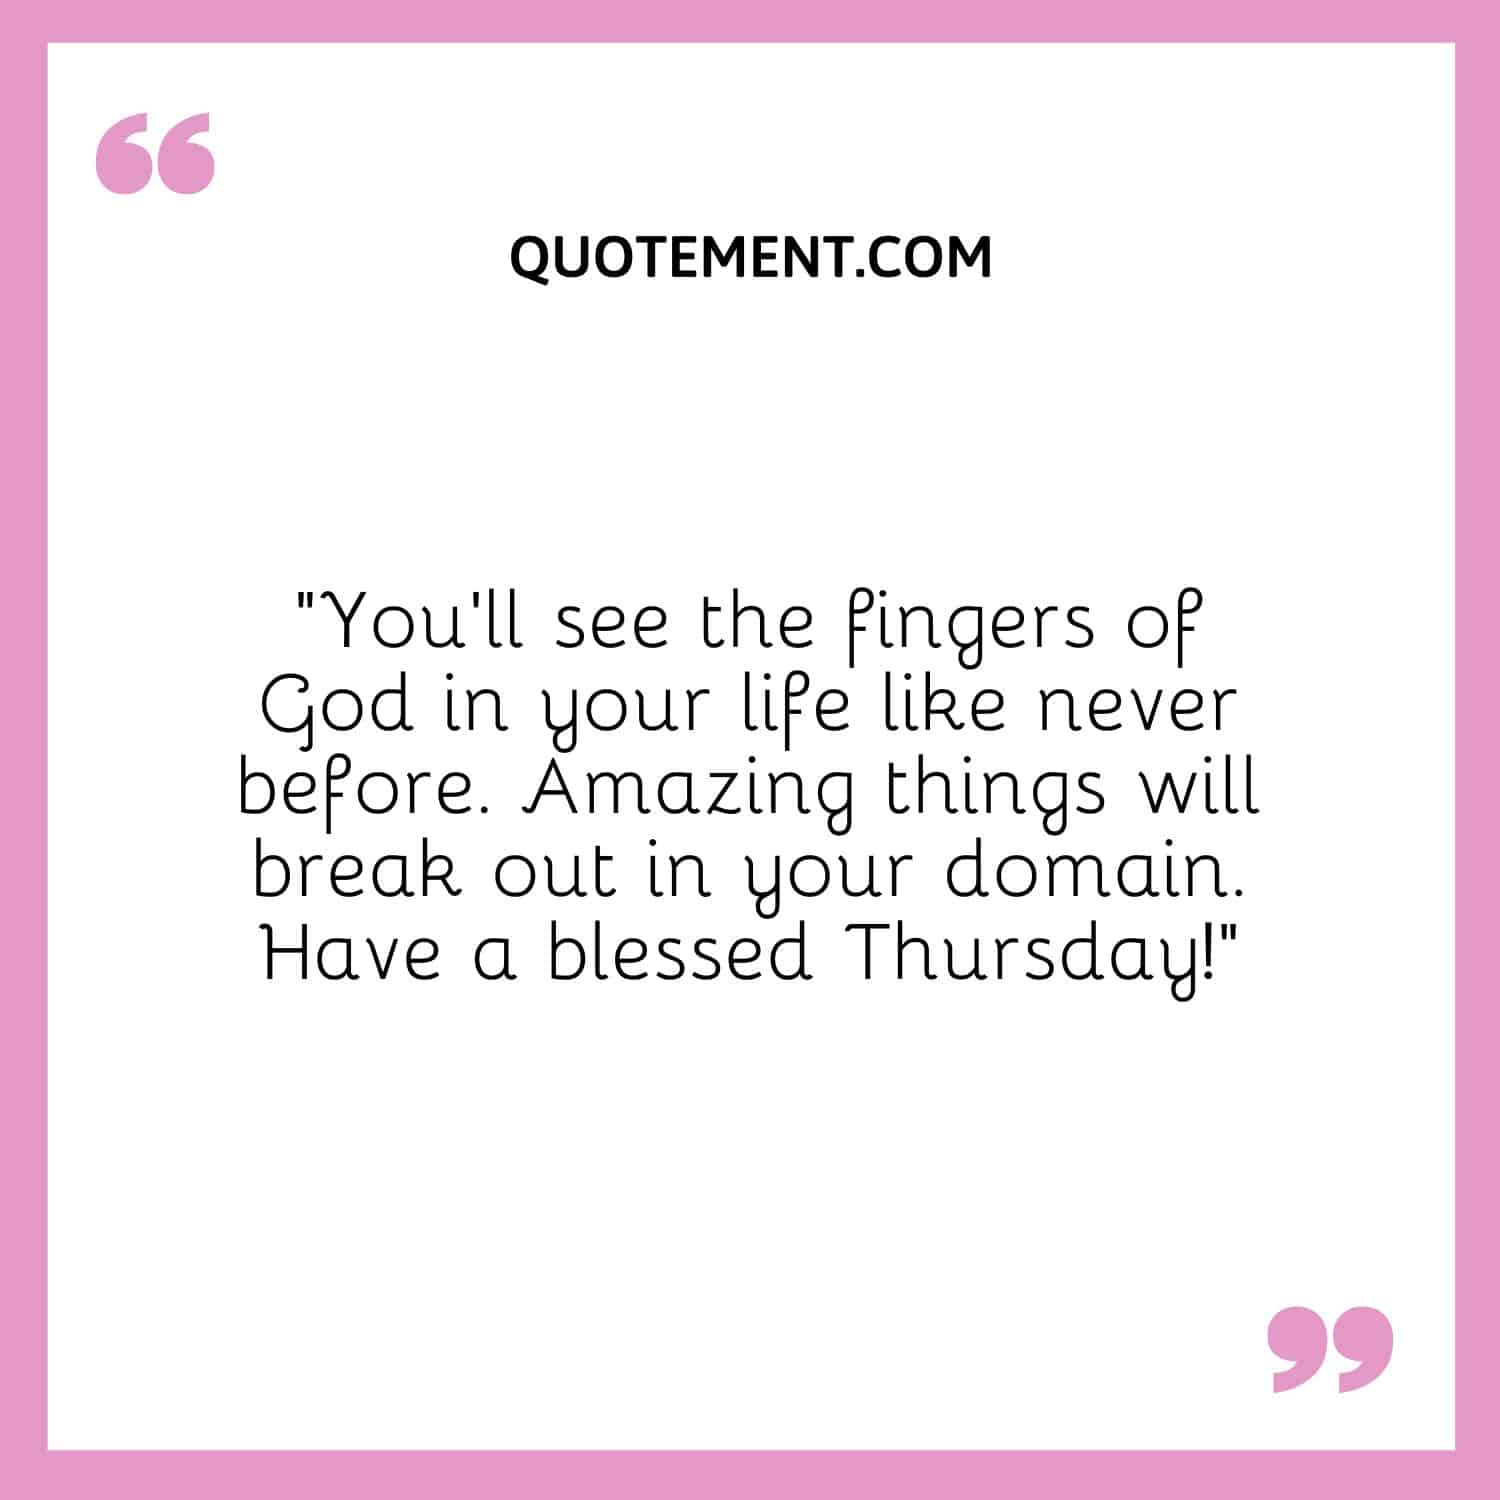 “You’ll see the fingers of God in your life like never before. Amazing things will break out in your domain. Have a blessed Thursday!”